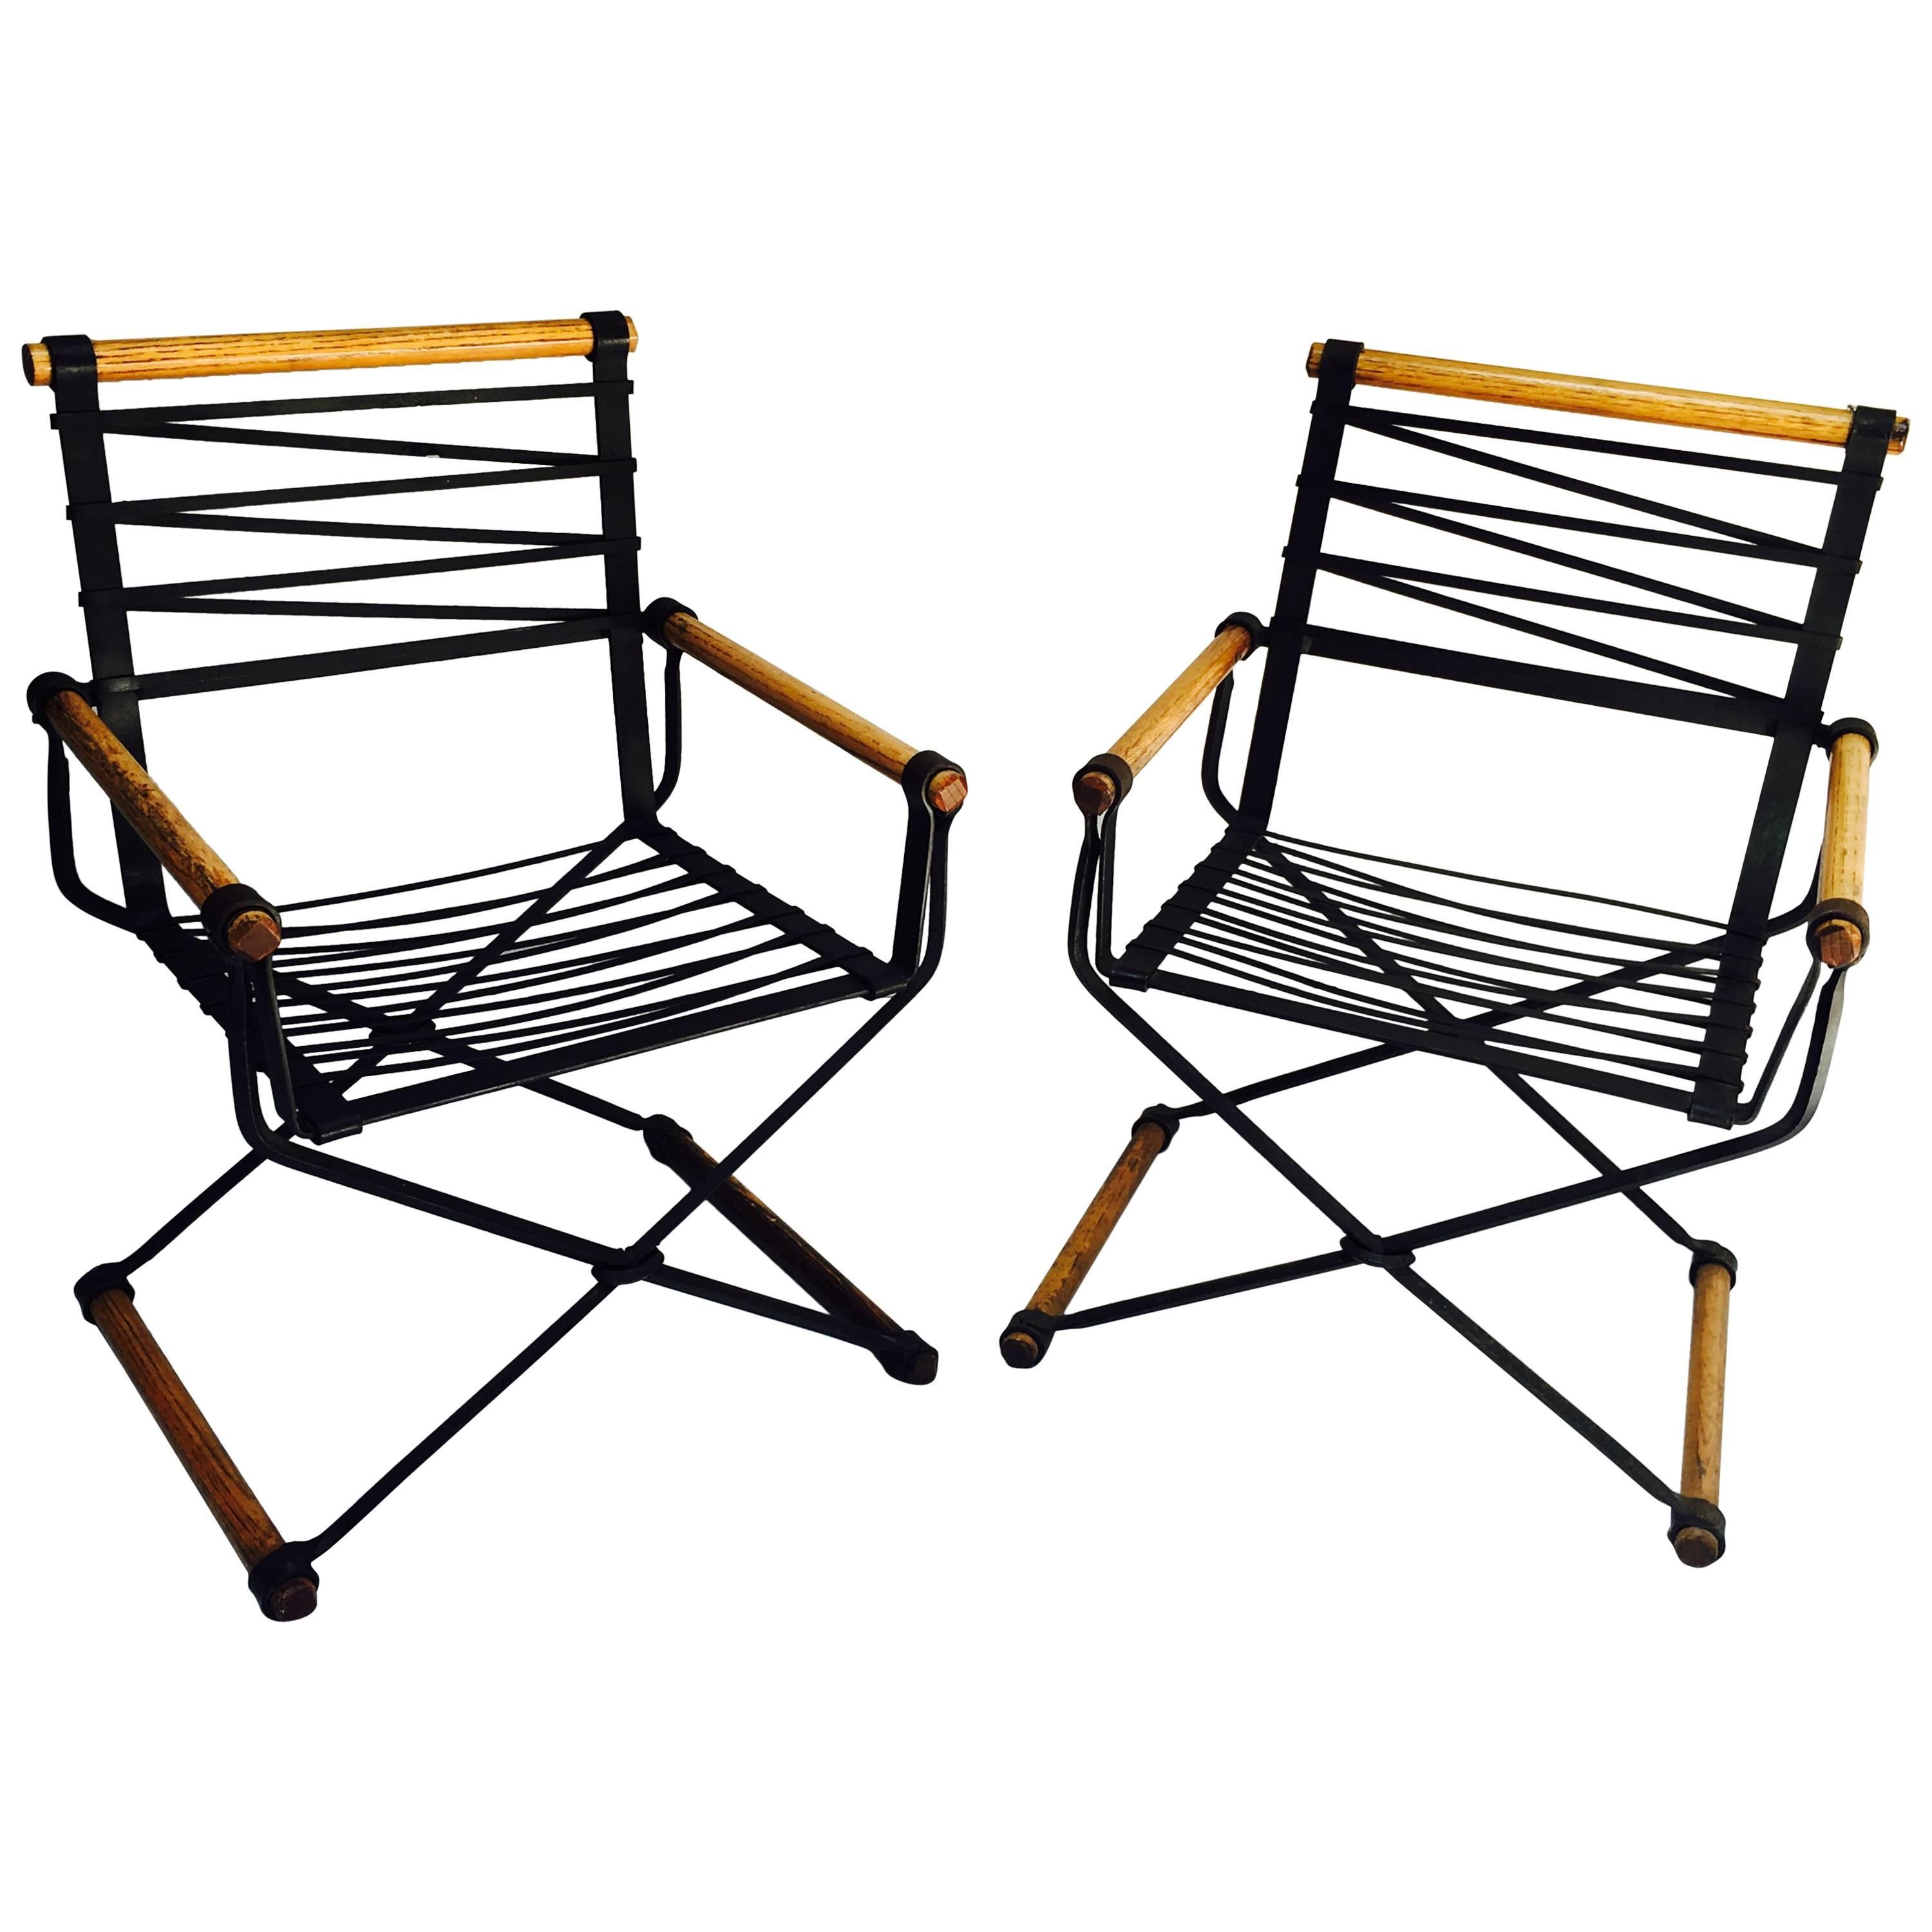 A pair of handcrafted wrought iron armchairs designed by Cleo Baldon and produced at her studio/work shop Terra in the 1960s.
The chairs and their cushions are in excellent condition.
To view the chairs at our Laguna Beach location please contact